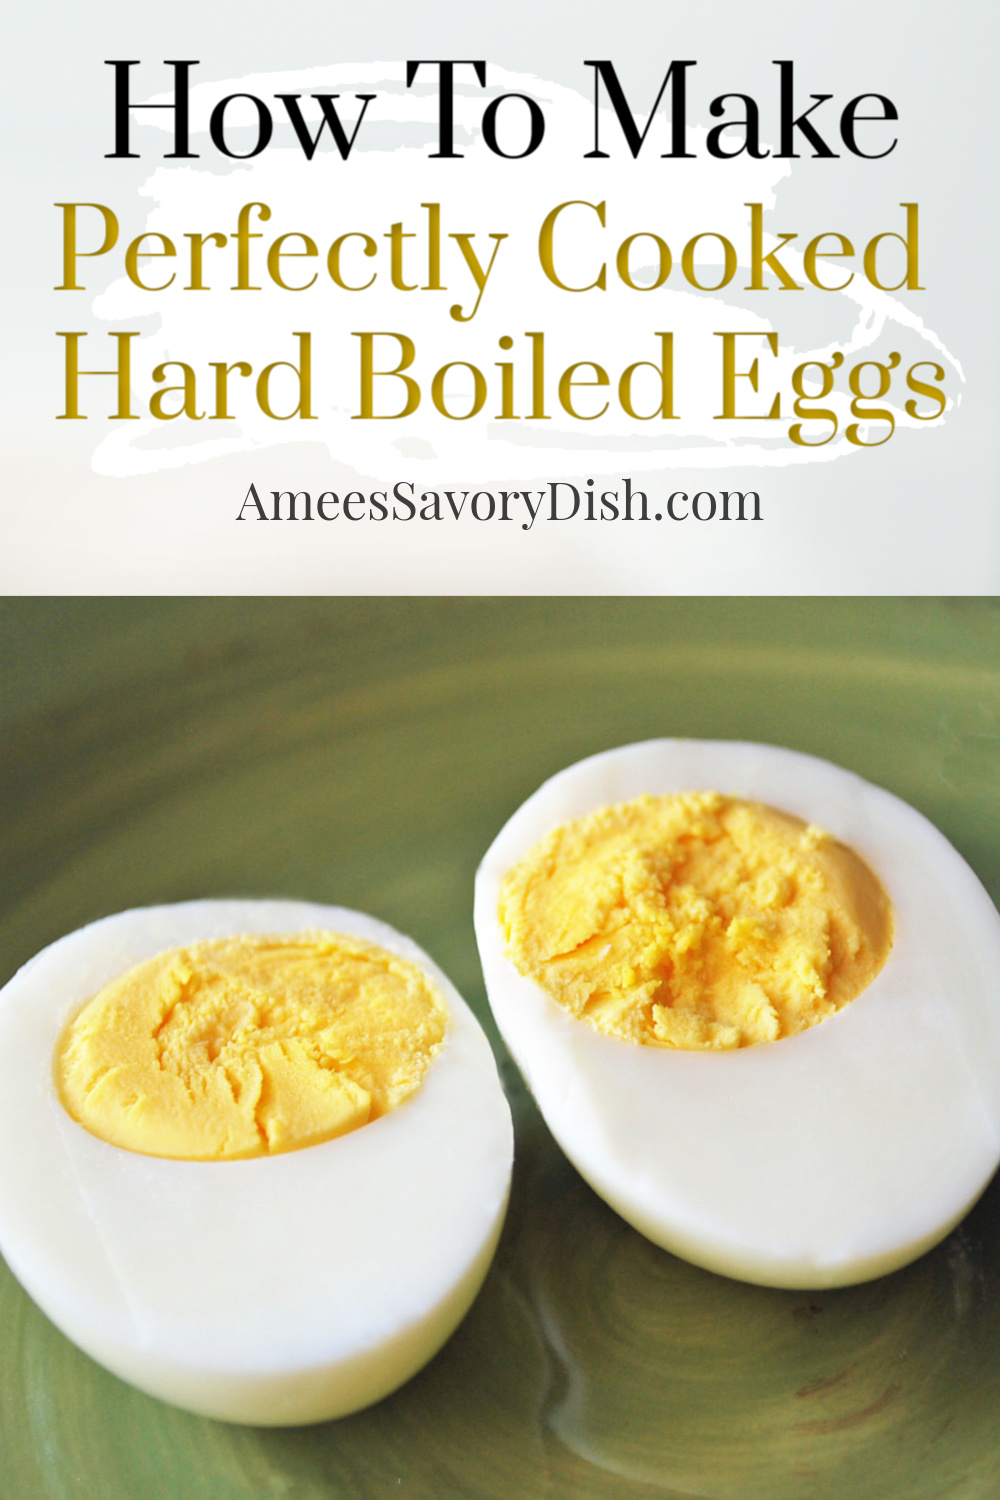 Use our easy tips and tricks for peeling hard-boiled eggs, and learn how to make perfectly cooked hard-boiled eggs every time! via @Ameessavorydish